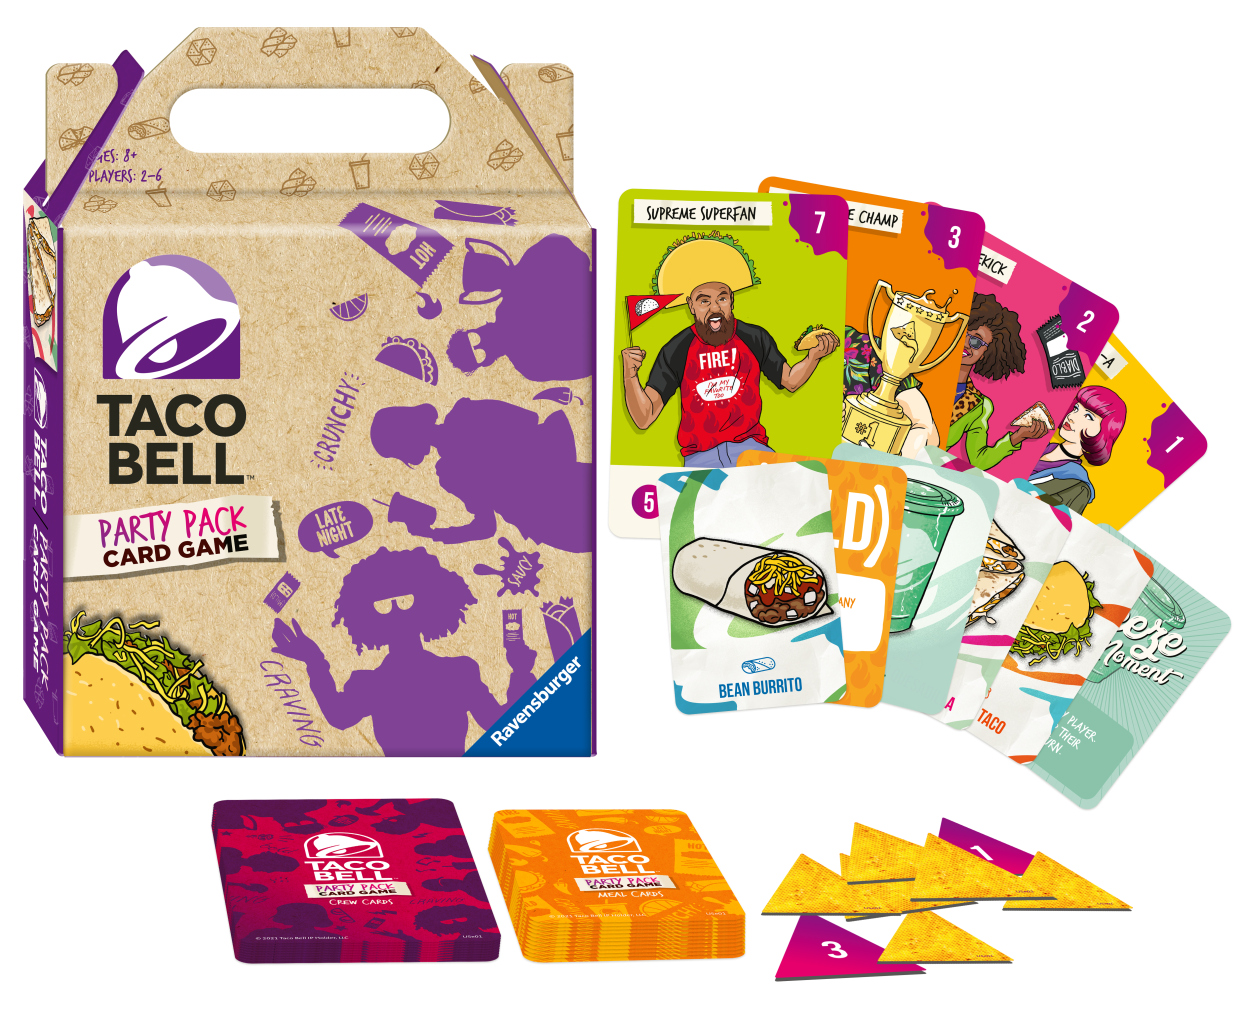 The Taco Bell Party Pack Card Game (Photo: Courtesy of Ravensburger)